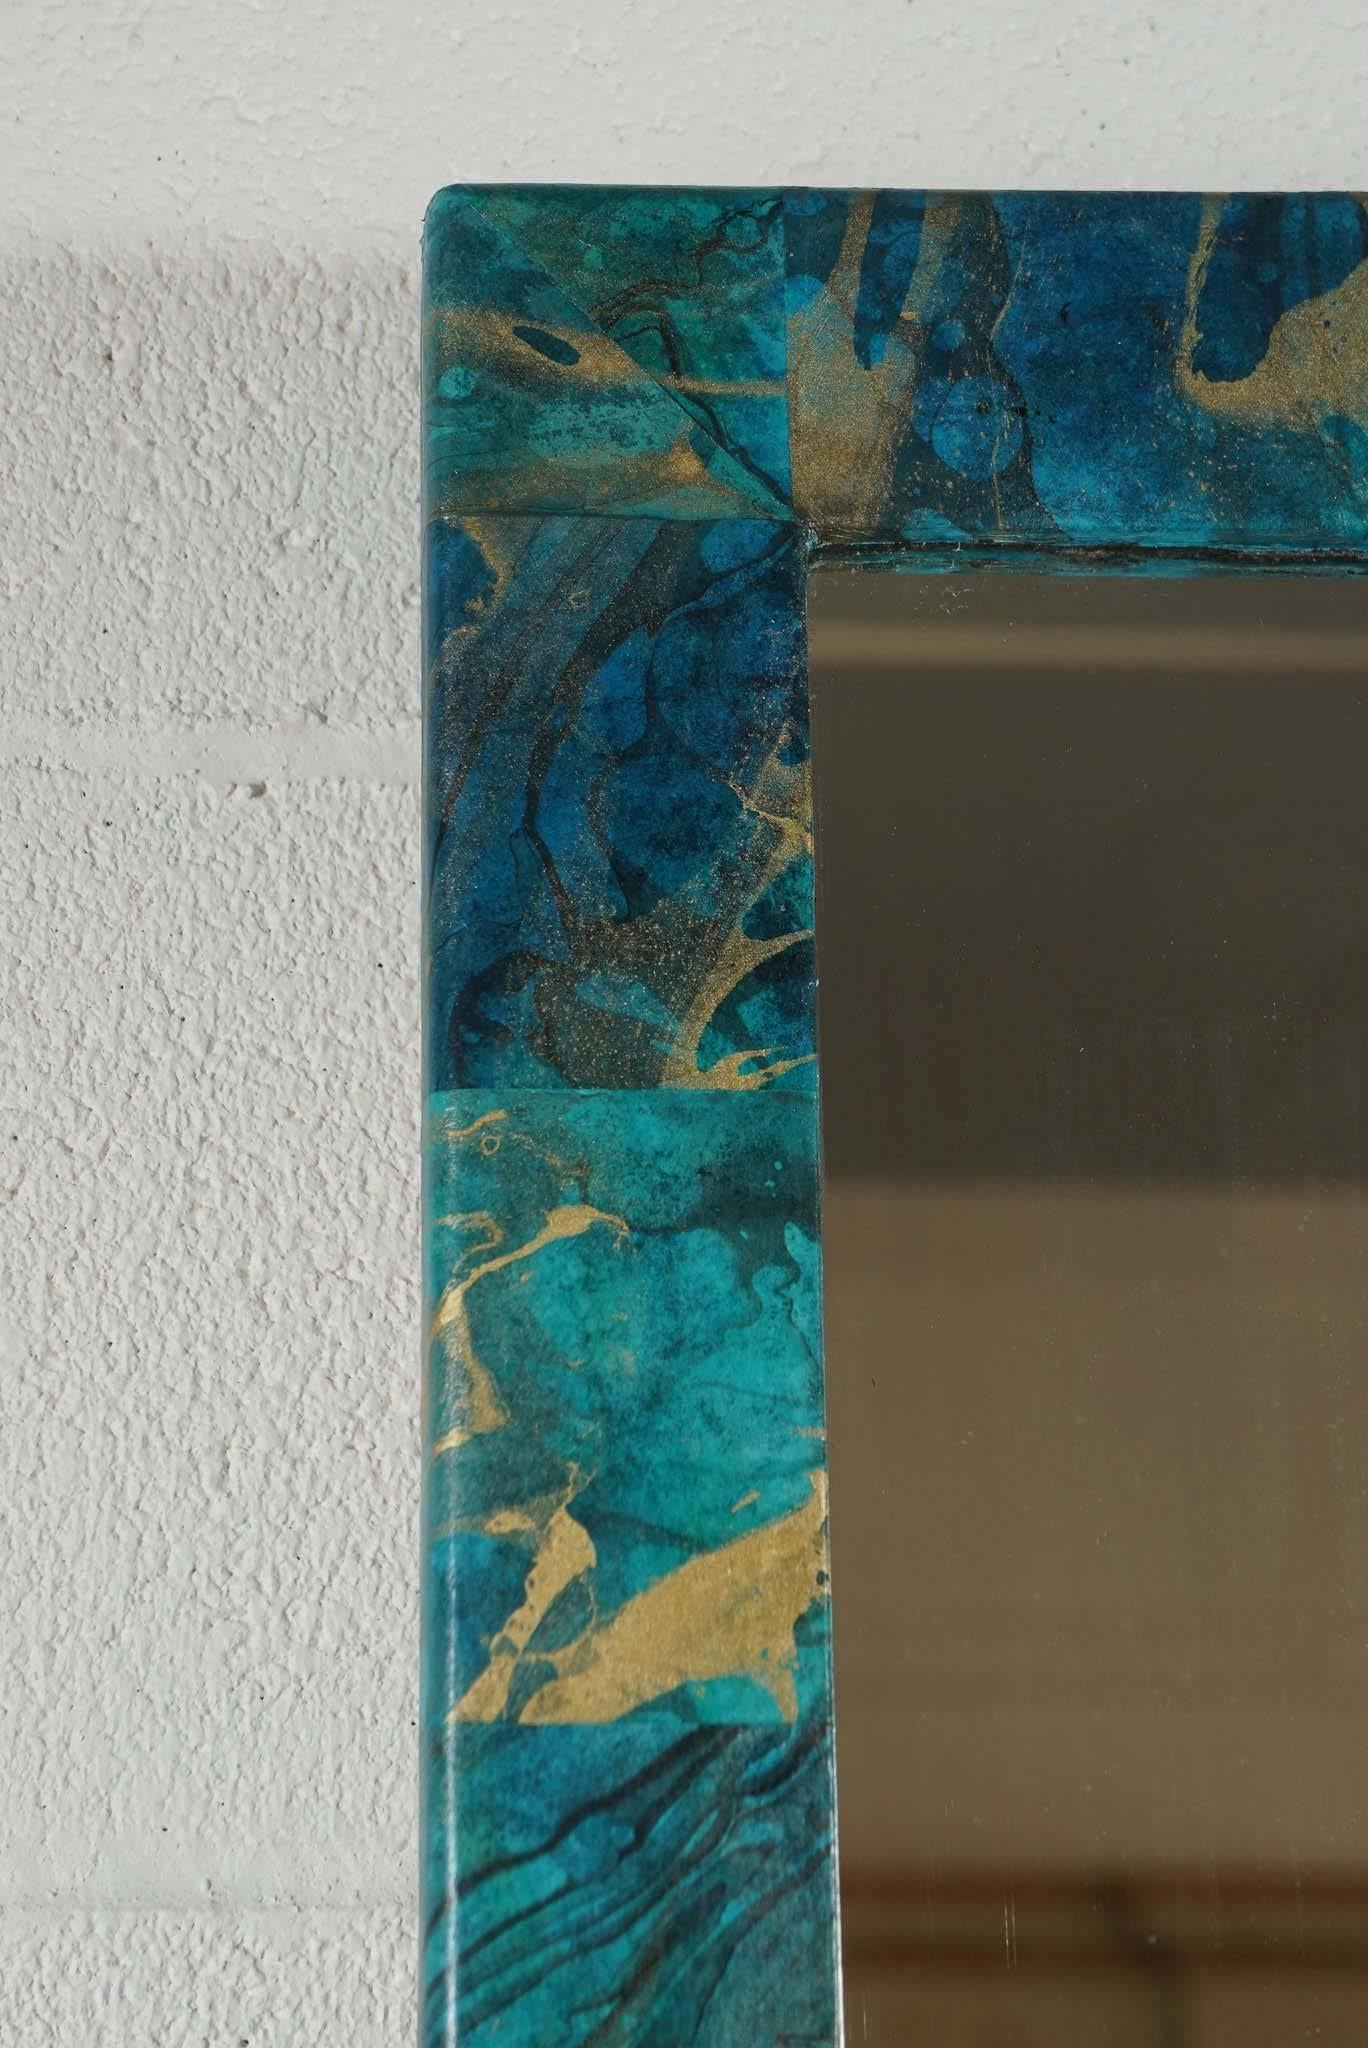 Here is a beautiful solid wood mirror that has been decoupaged in a block pattern with a marbleized turquoise and gold paper. The surface has been treated with a double coat satin medium. The mirror insert has a desirable vintage surface with slight